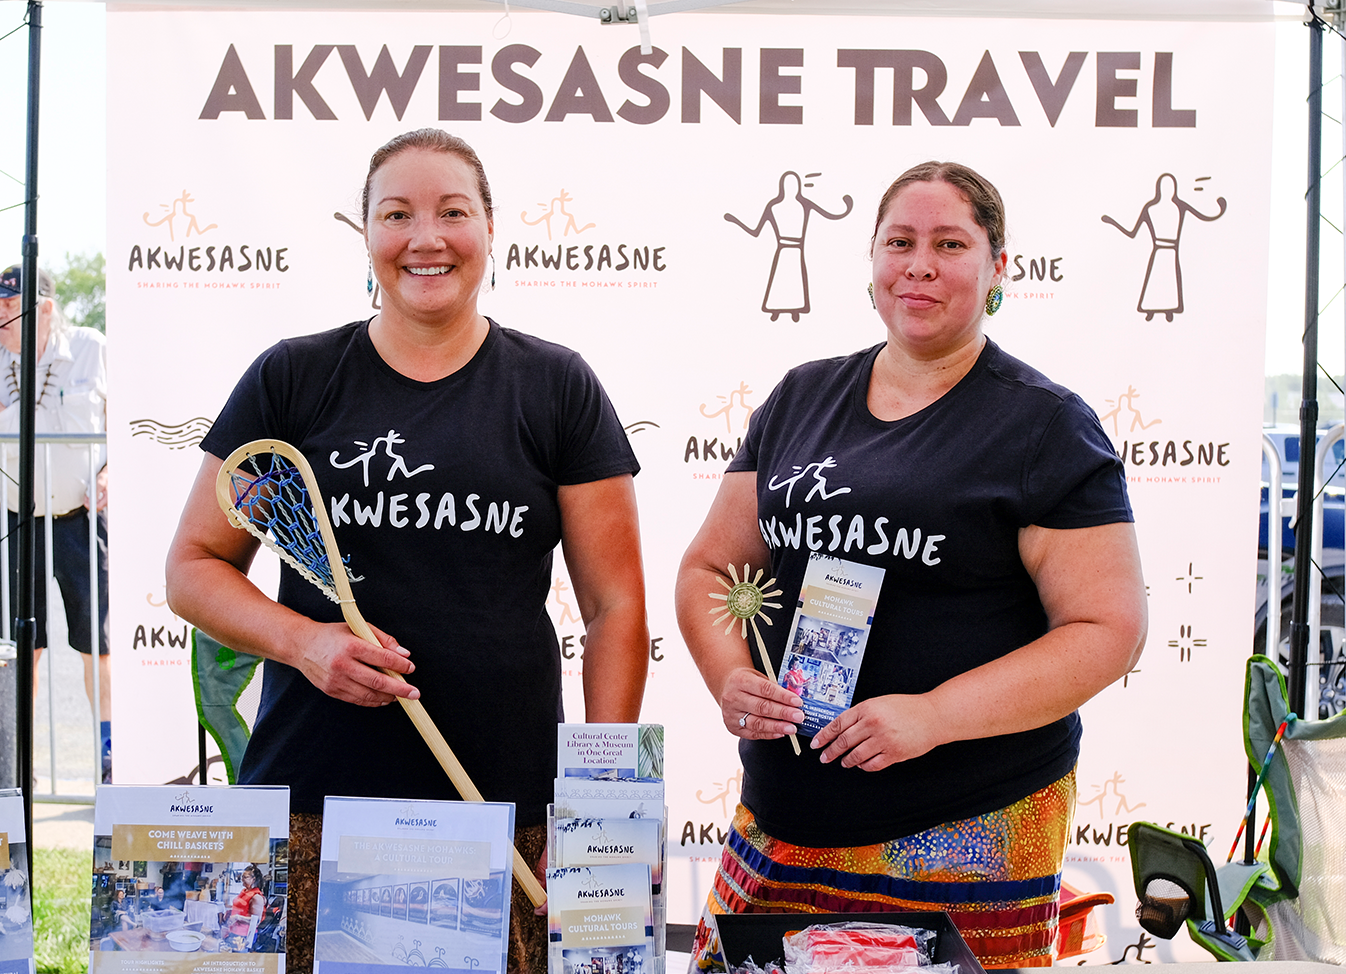 This year’s New York State Tourism Excellence Awards include multiple new awards categories to acknowledge the critical work done in advancing the areas of sustainability, DEAI (diversity, equity, accessibility, and inclusion), international marketing, travel itineraries, and promoting the great outdoors of New York State. Akwesasne Travel was selected for Excellence in Sustainable Stewardship: Champions of Change.